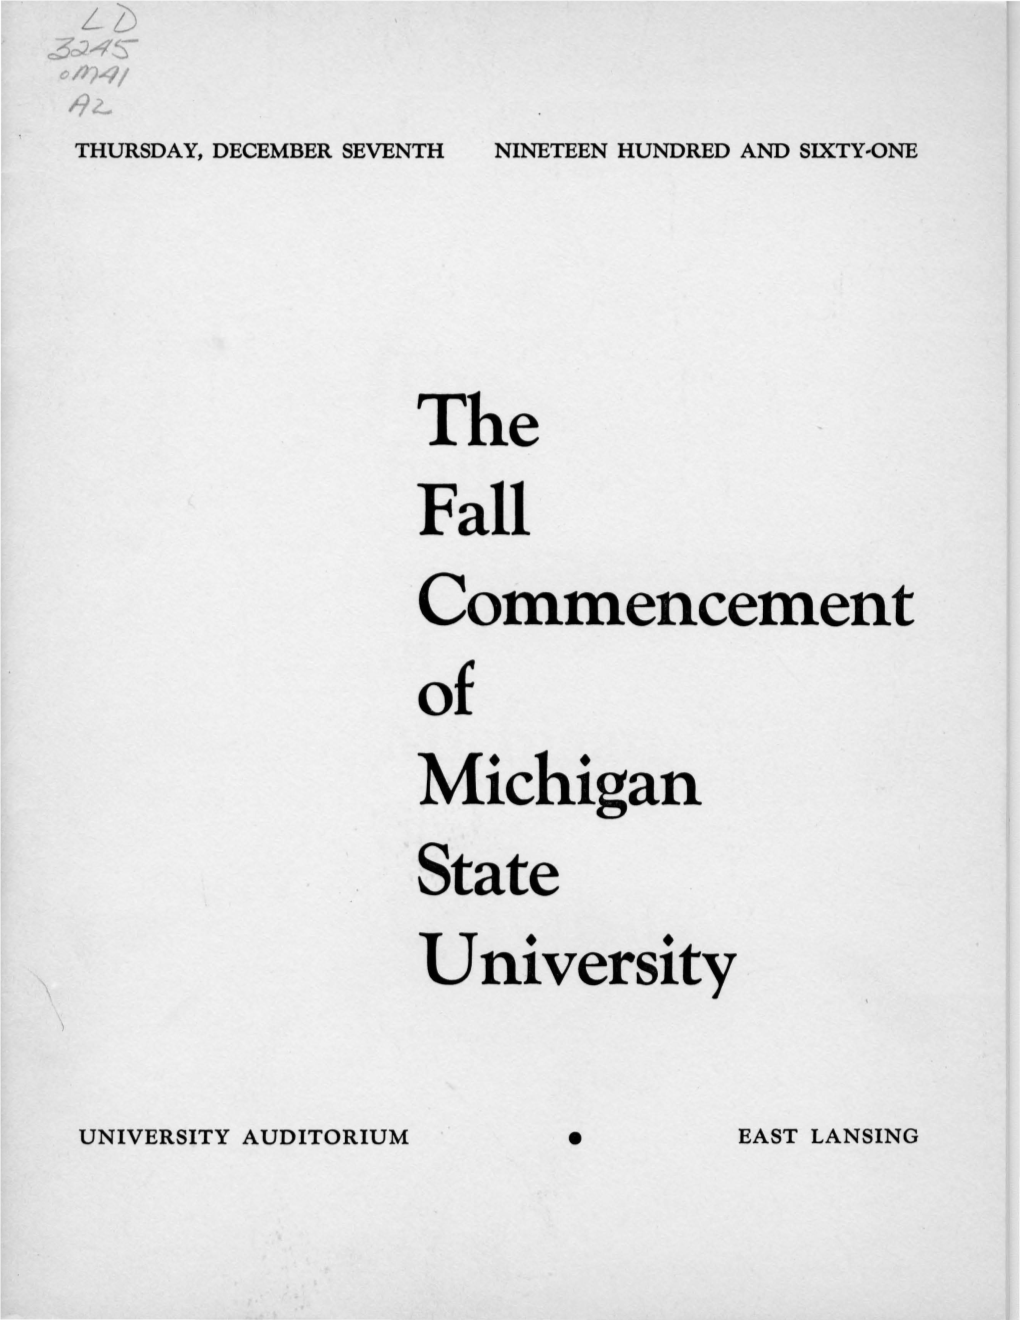 The Commencement Michigan State University